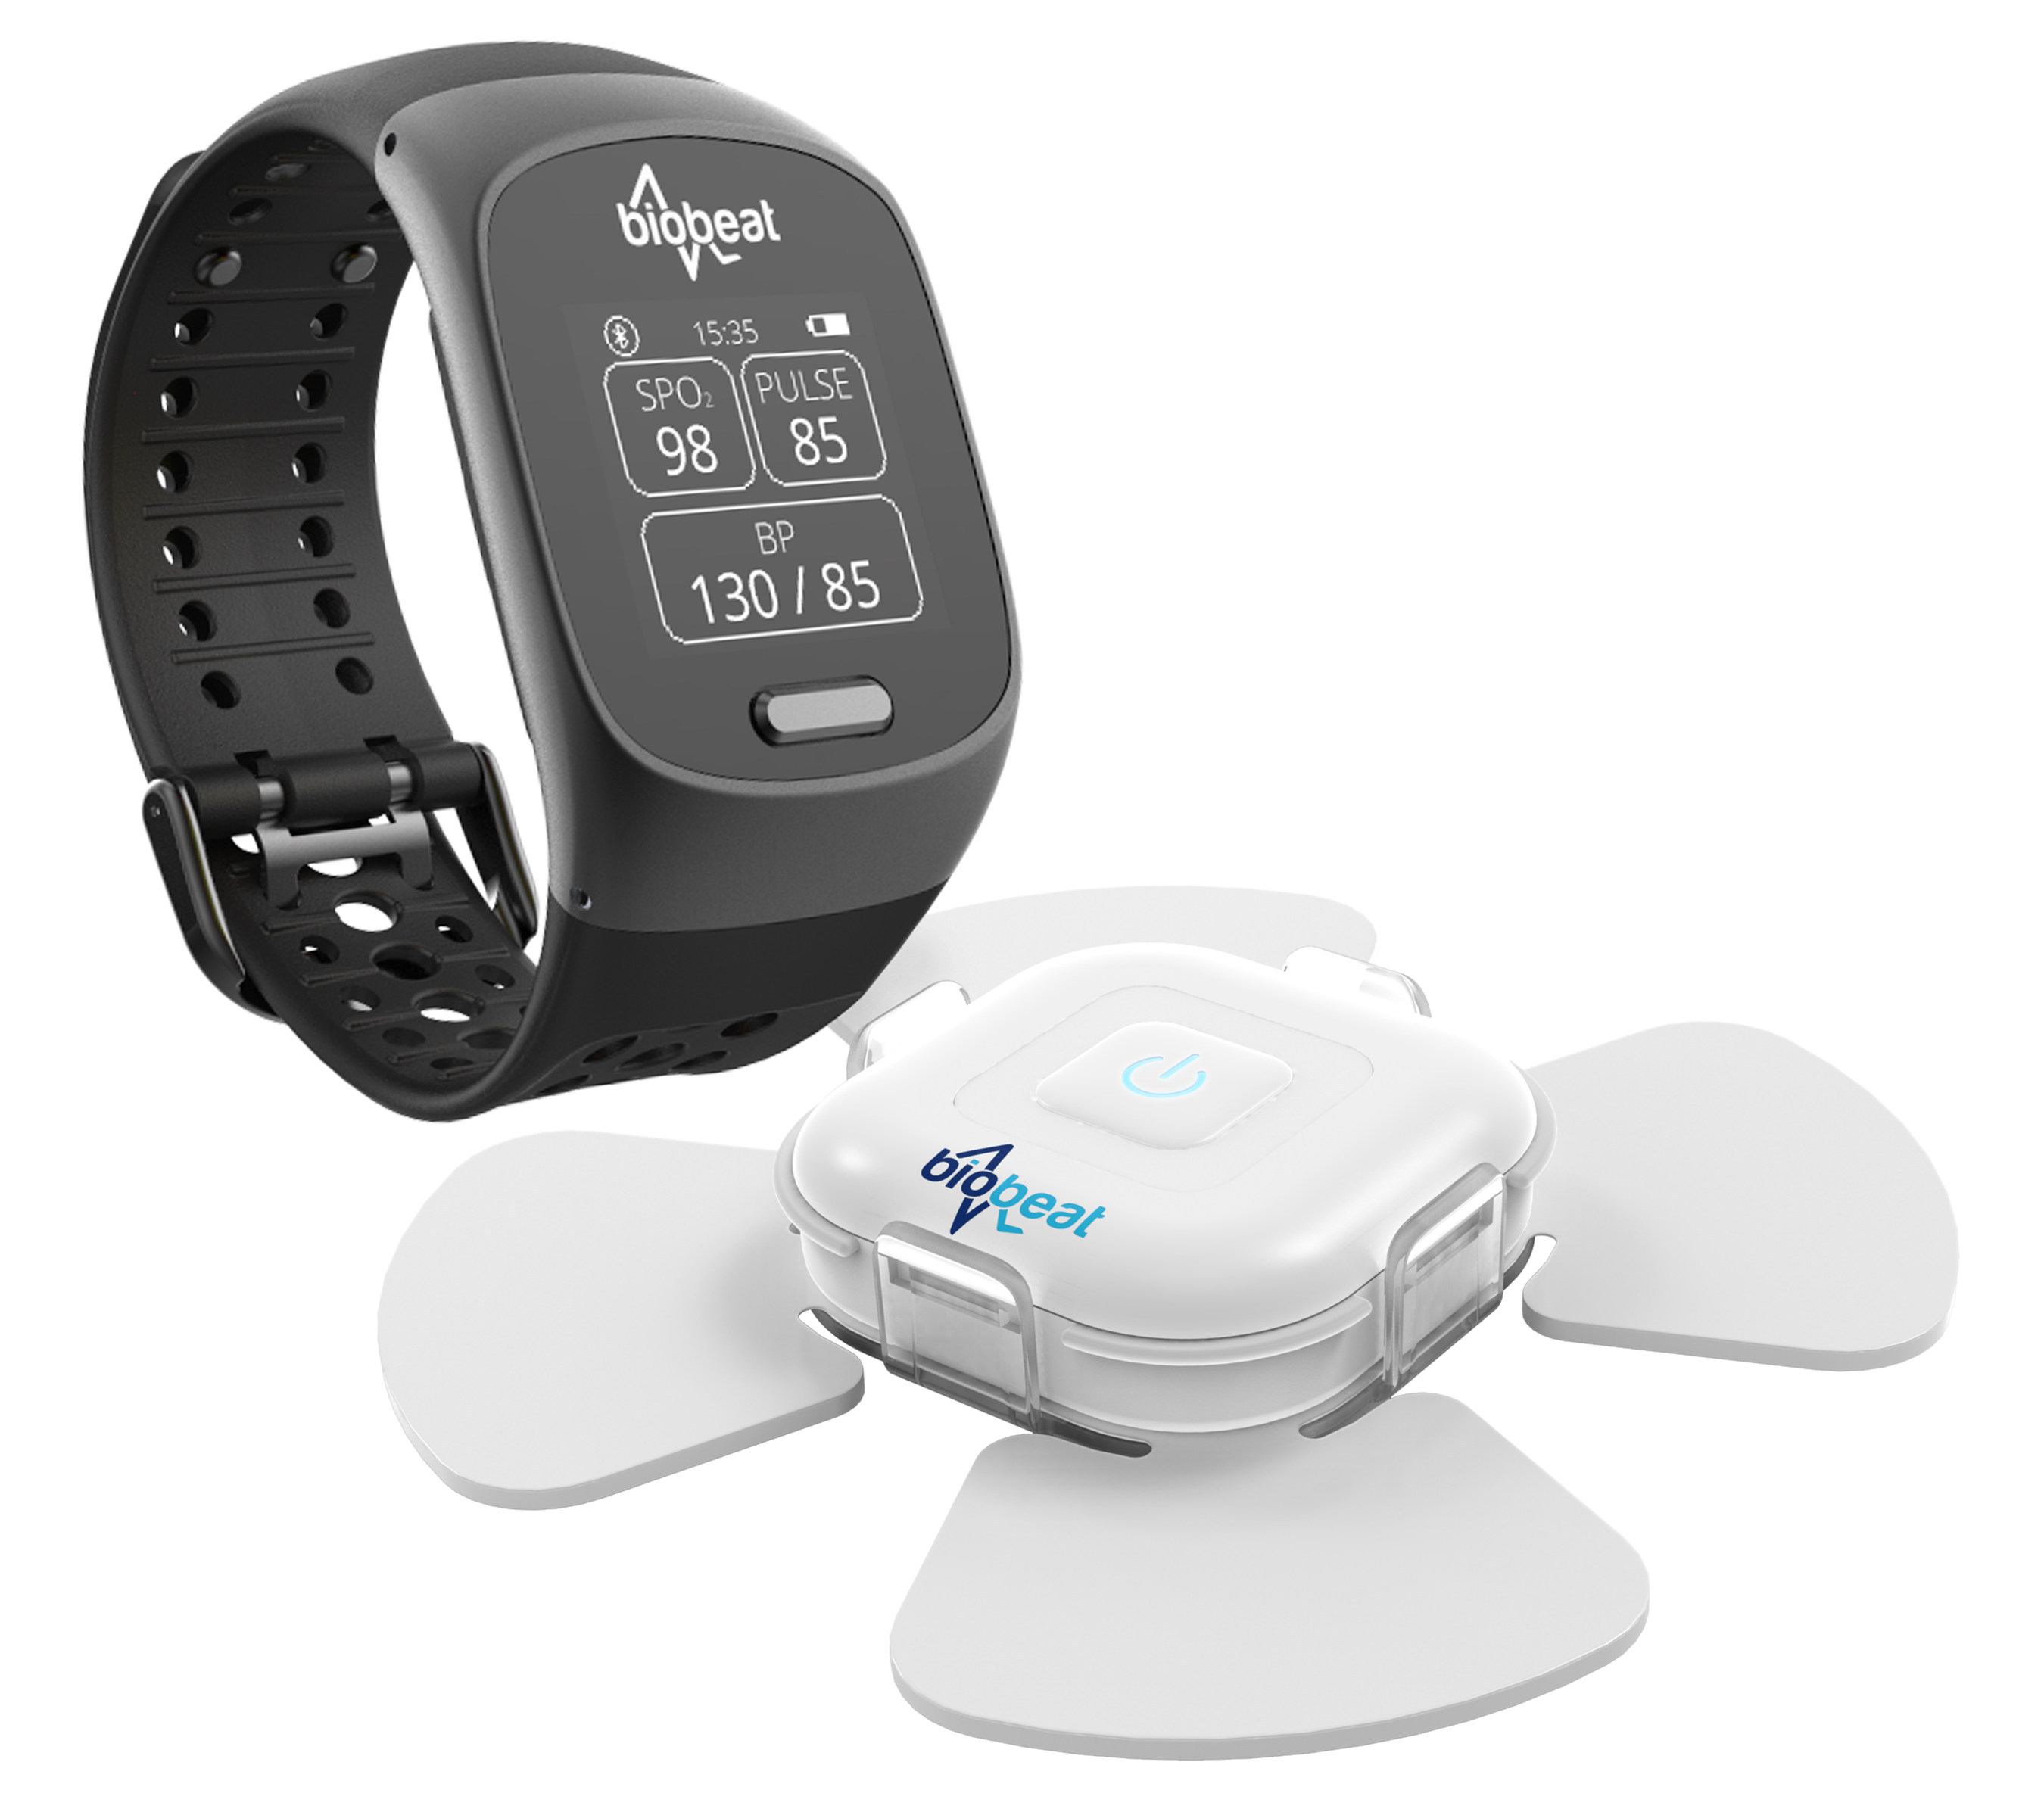 Biobeat’s smartwatch and patch connect to the cloud through either a smartphone or a dedicated gateway. The user will use one or the other device; whereas the watch is worn on the wrist the patch is to be placed anywhere on the upper torso.